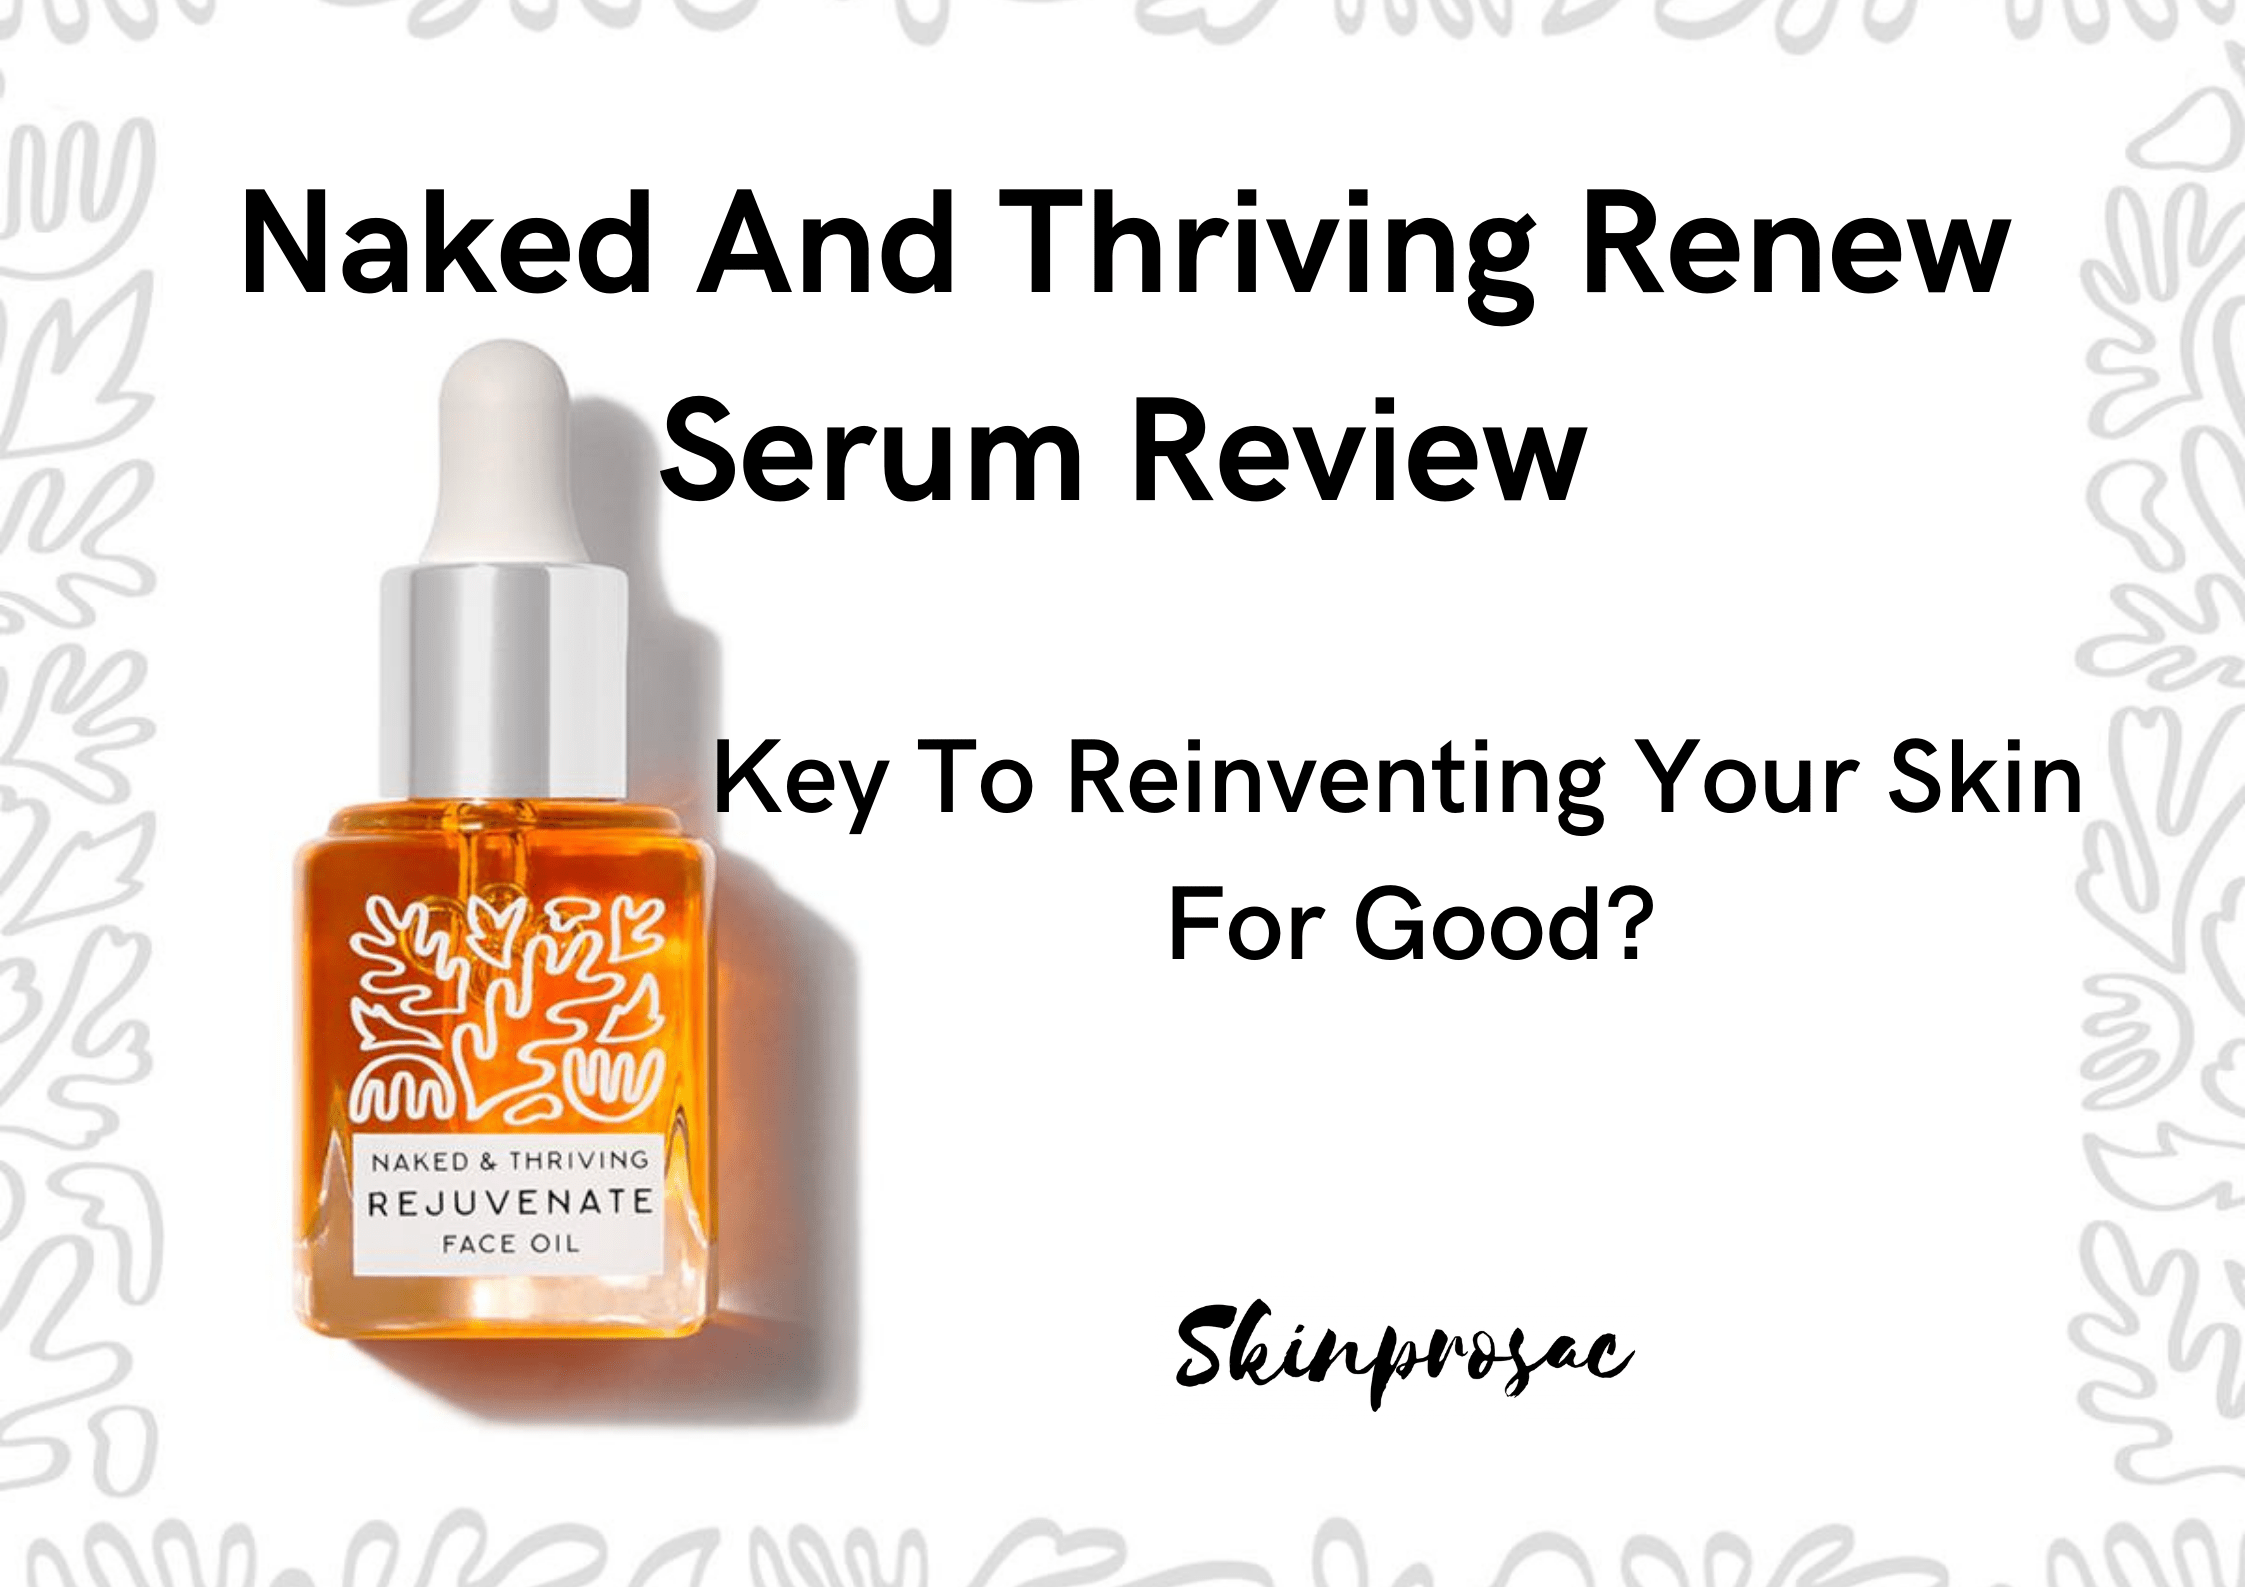 Naked And Thriving Renew Serum reviews